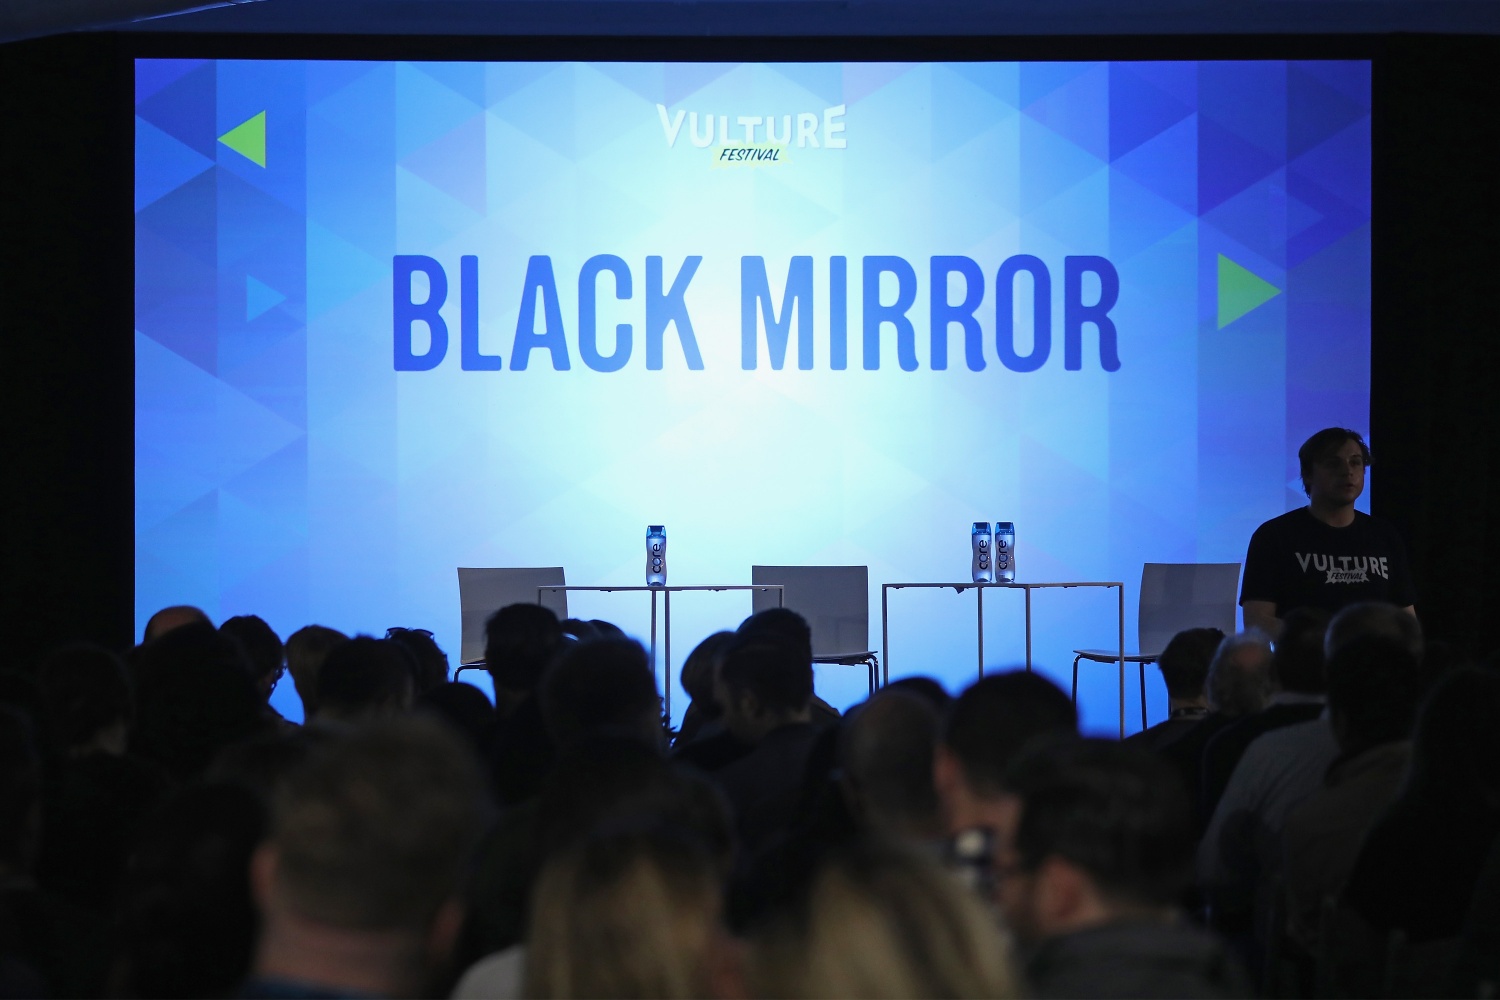 Guests fill the audience for the Black Mirror panel during the 2017 Vulture Festival at Milk Studios on May 21, 2017 in New York City. (Photo by Cindy Ord/Getty Images for Vulture Festival)